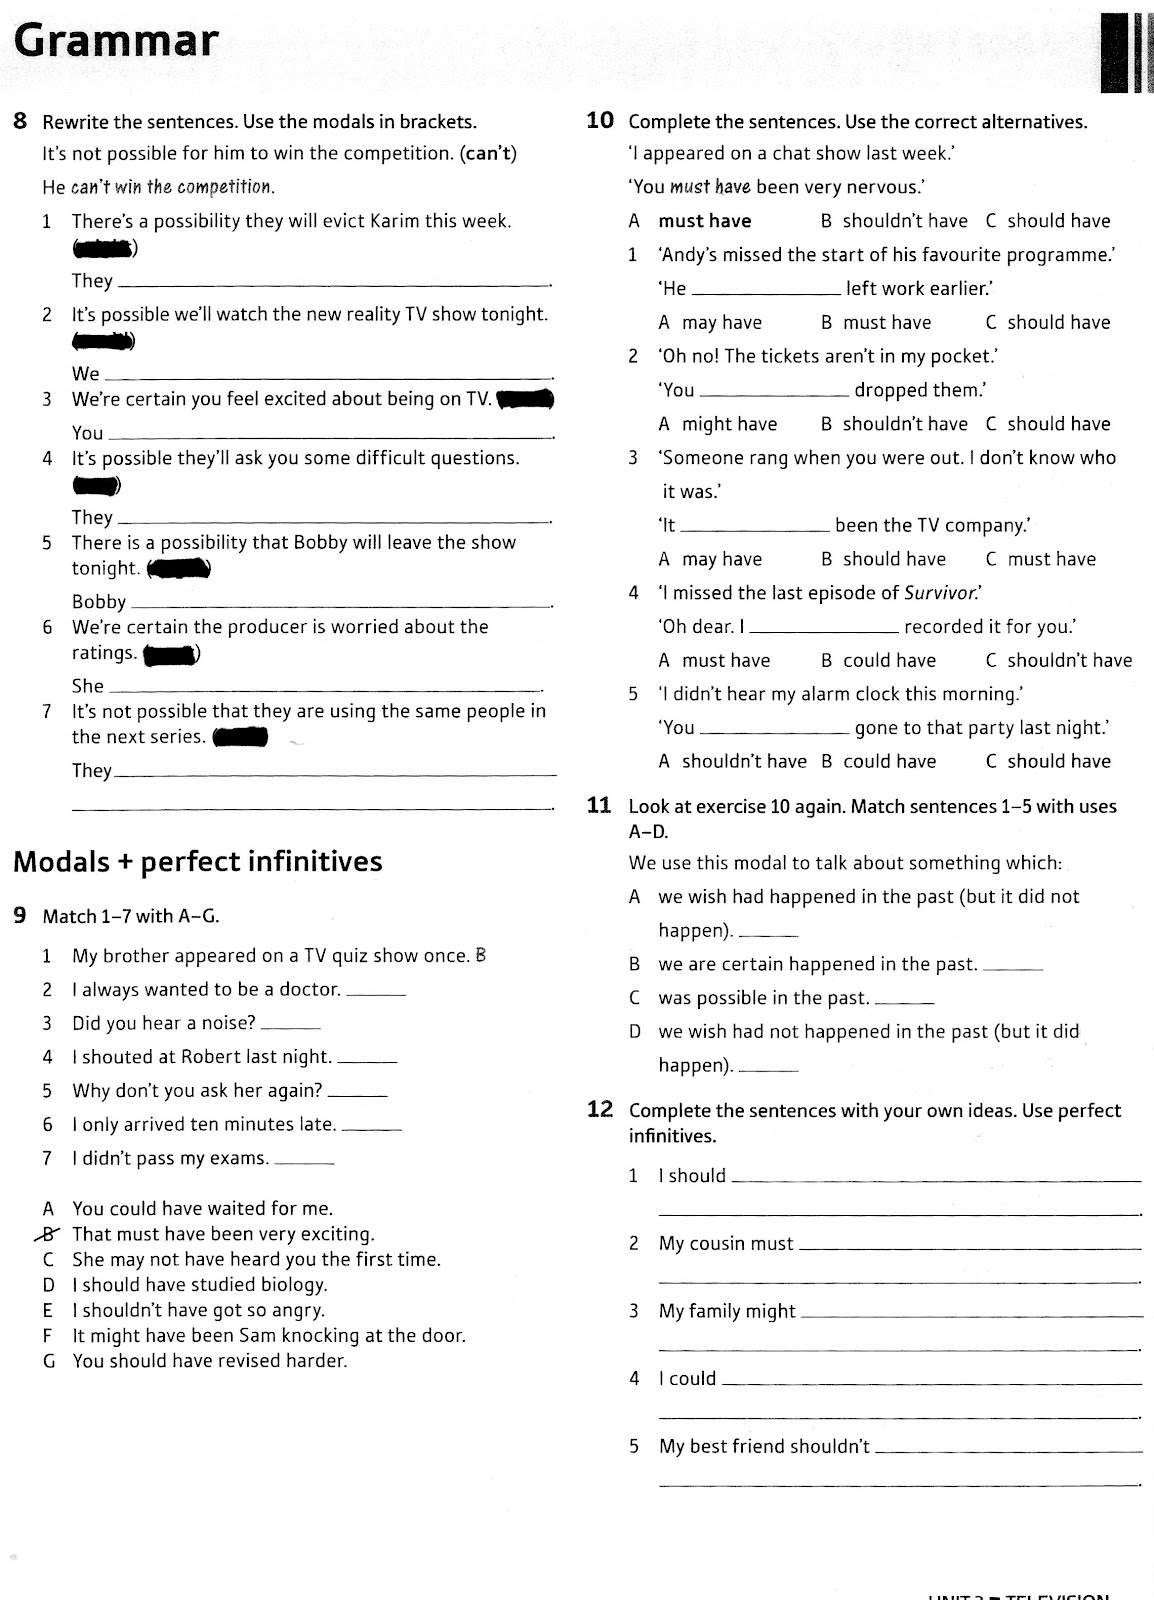 9-best-images-of-modal-verbs-worksheets-with-answers-modal-auxiliary-verbs-worksheets-modal